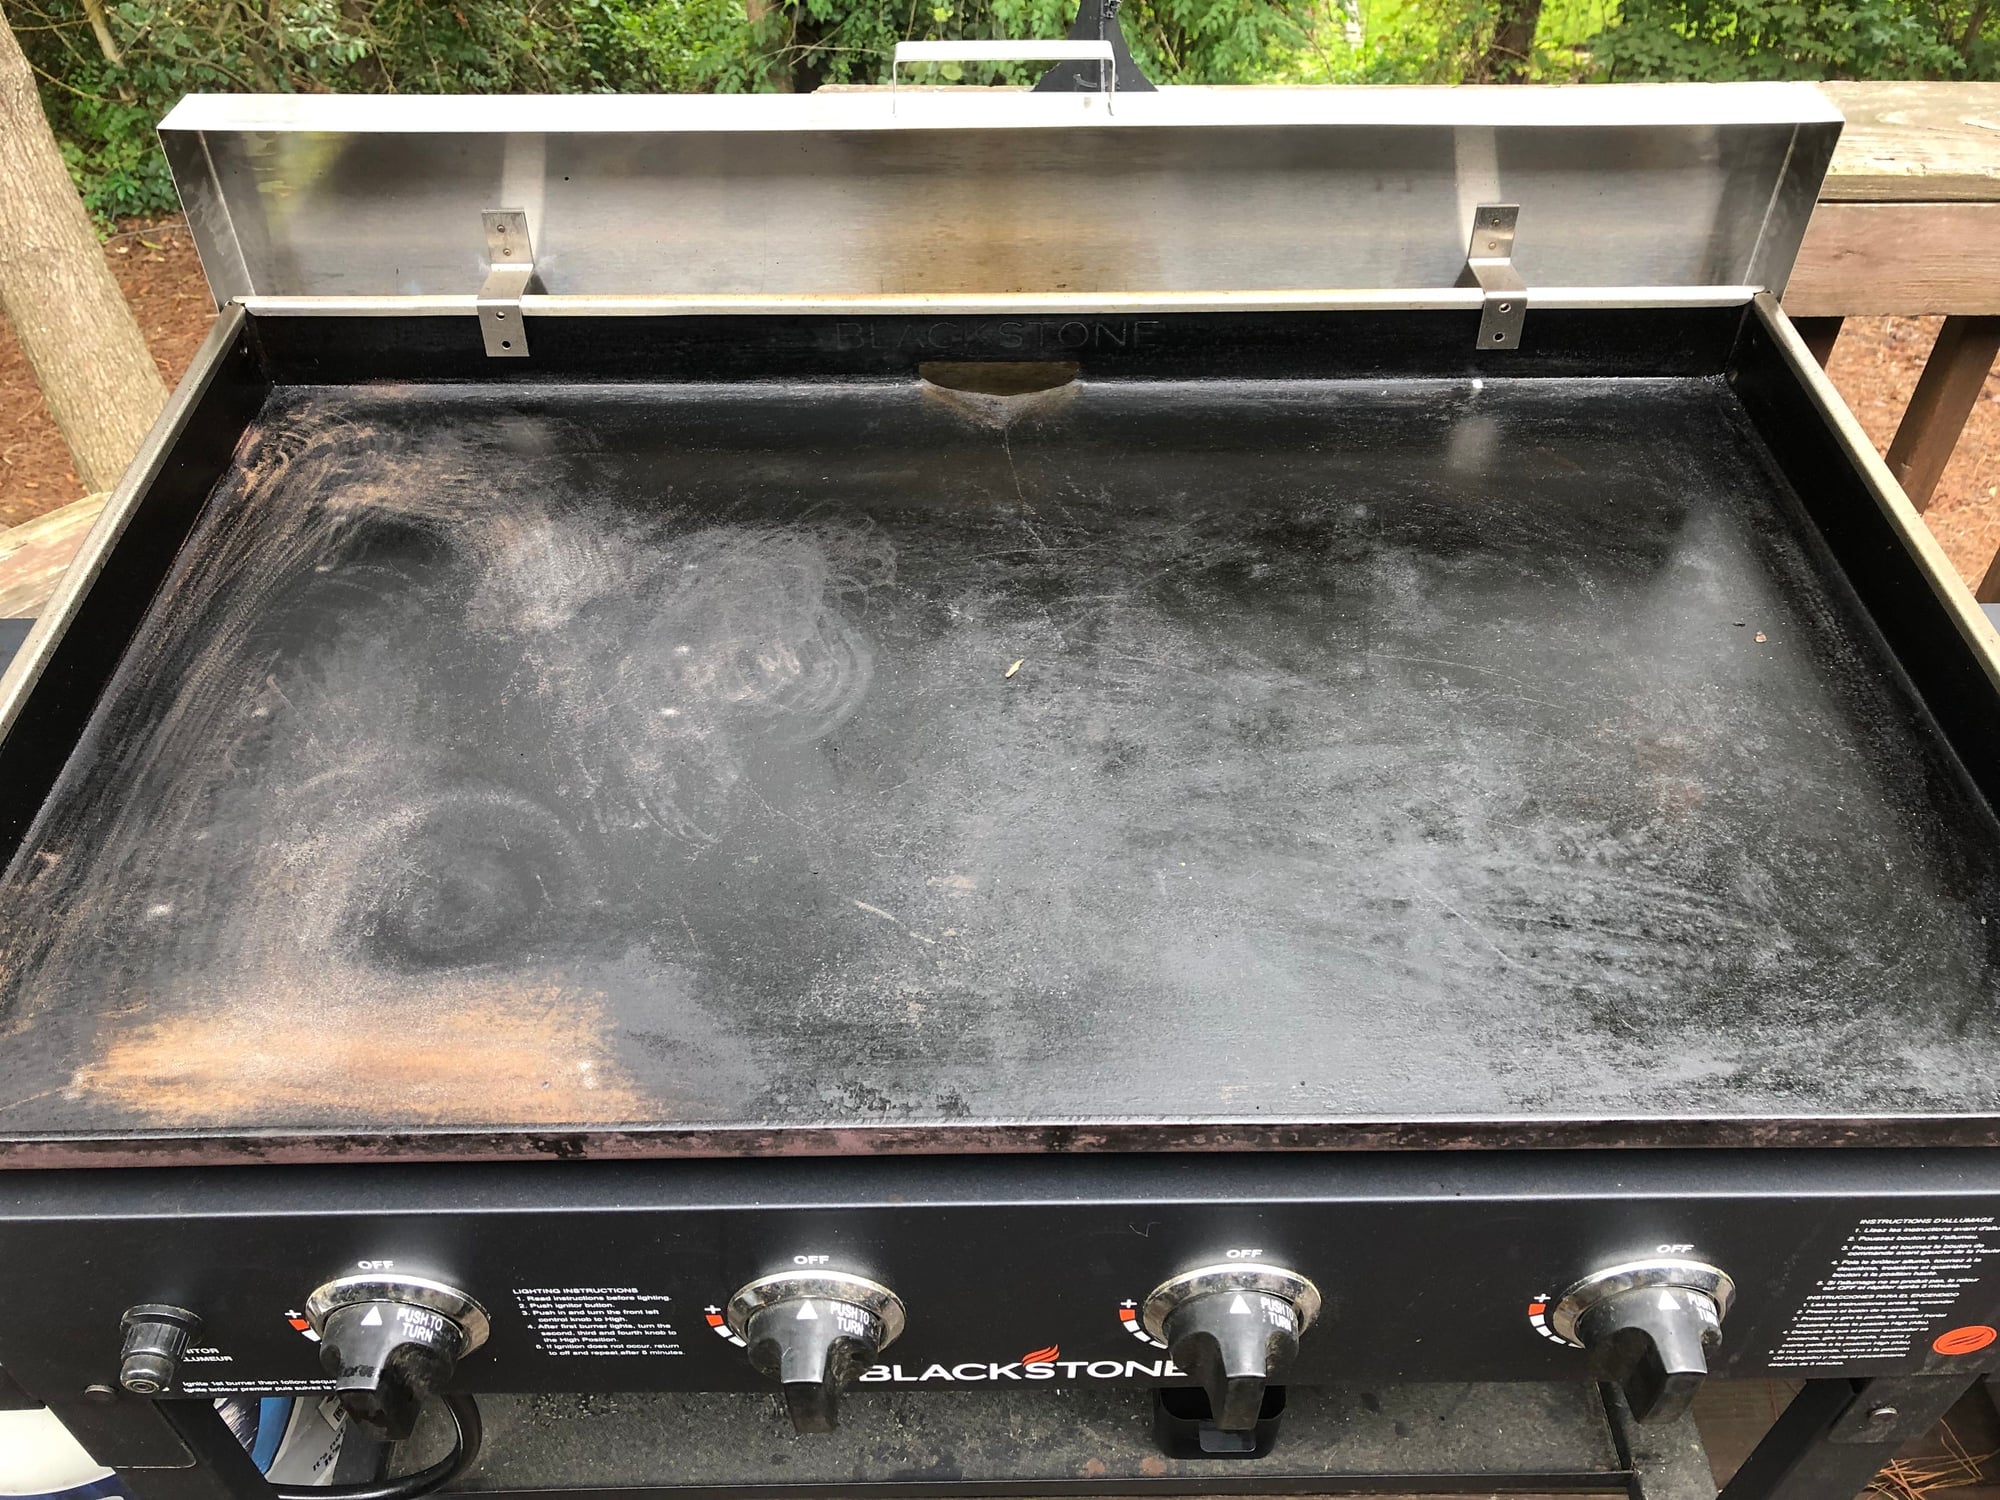 First seasoning of new Blackstone griddle! : r/blackstonegriddle